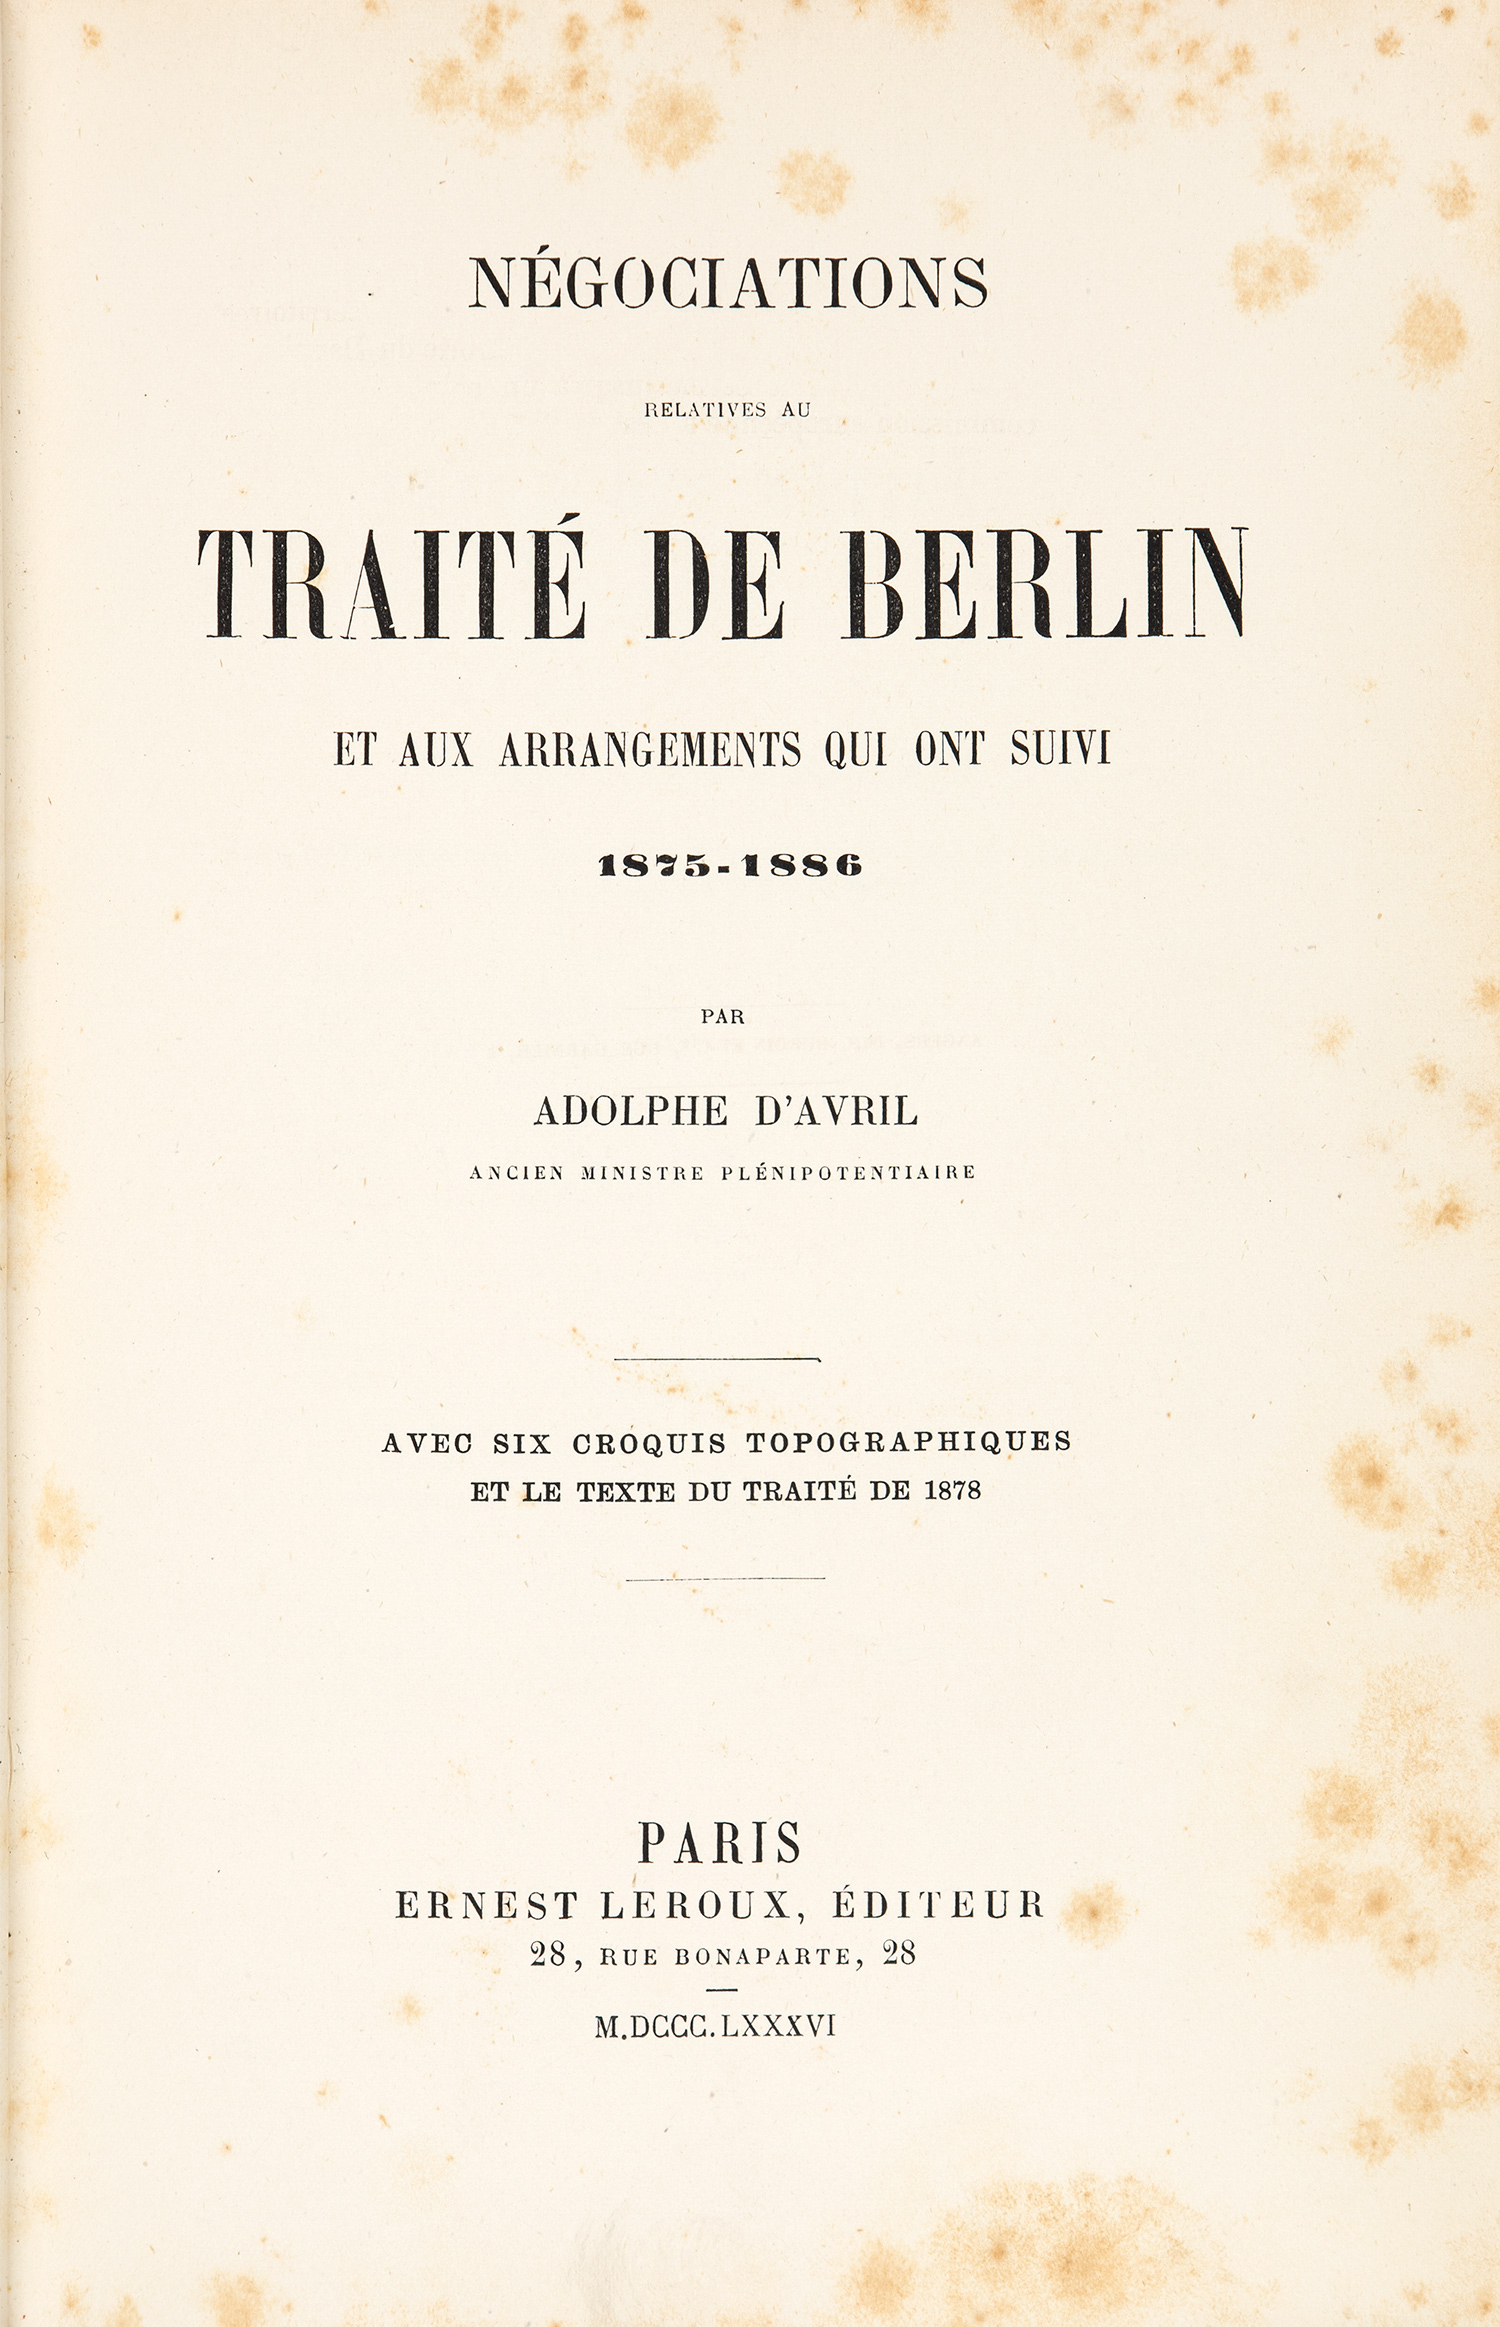 D'AVRIL, Adolphe.